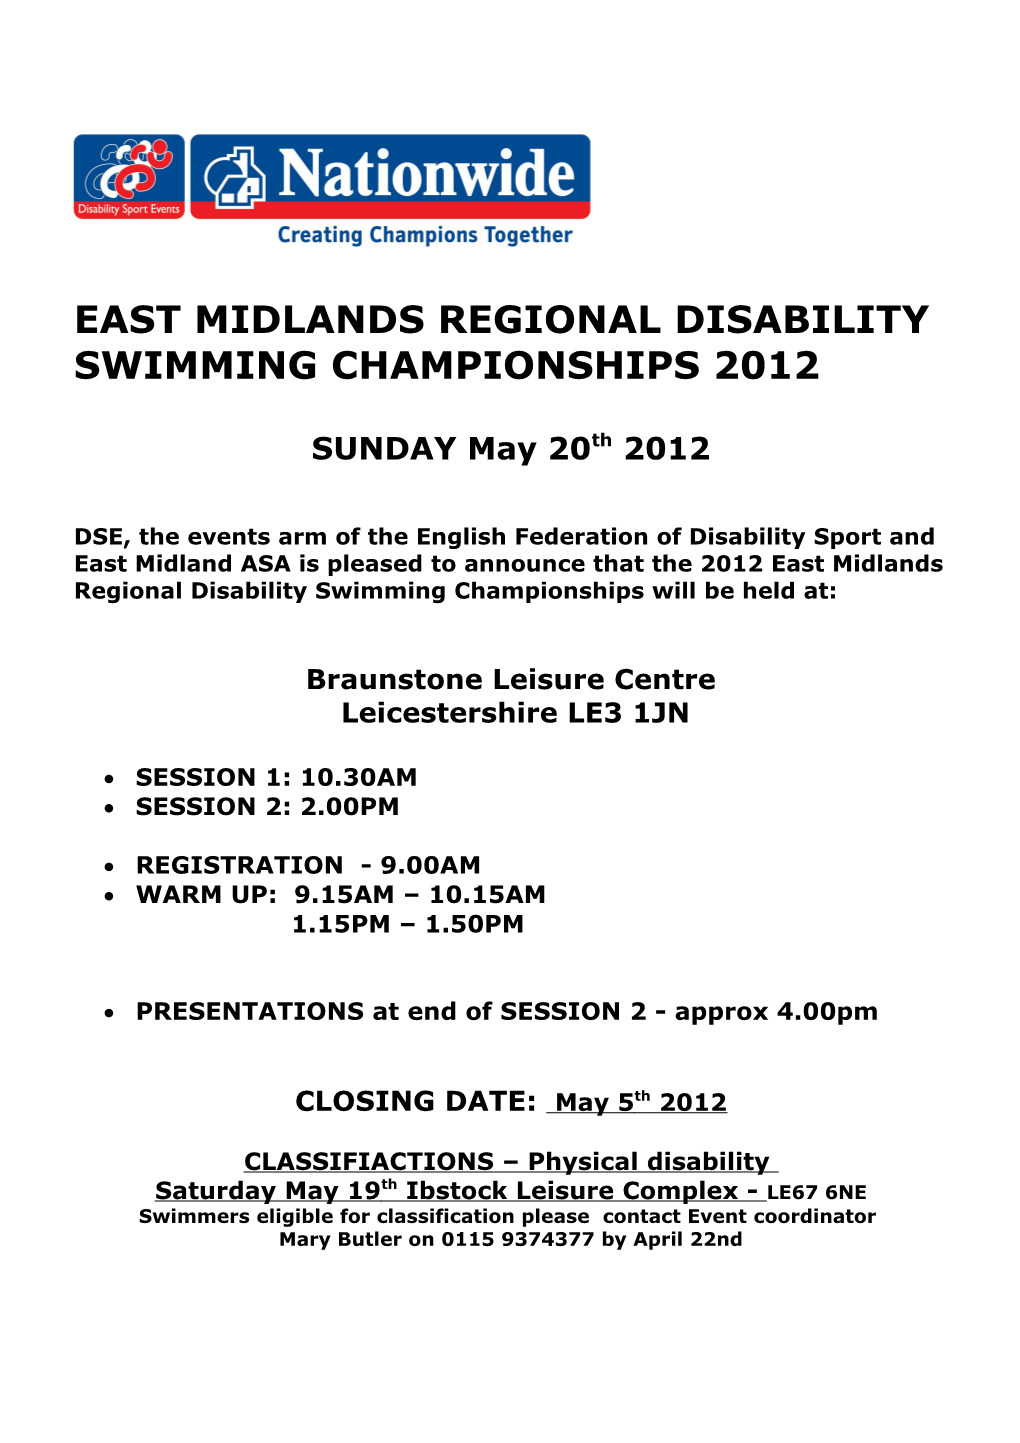 East Midlands Regional Disability Swimming Championships 2012